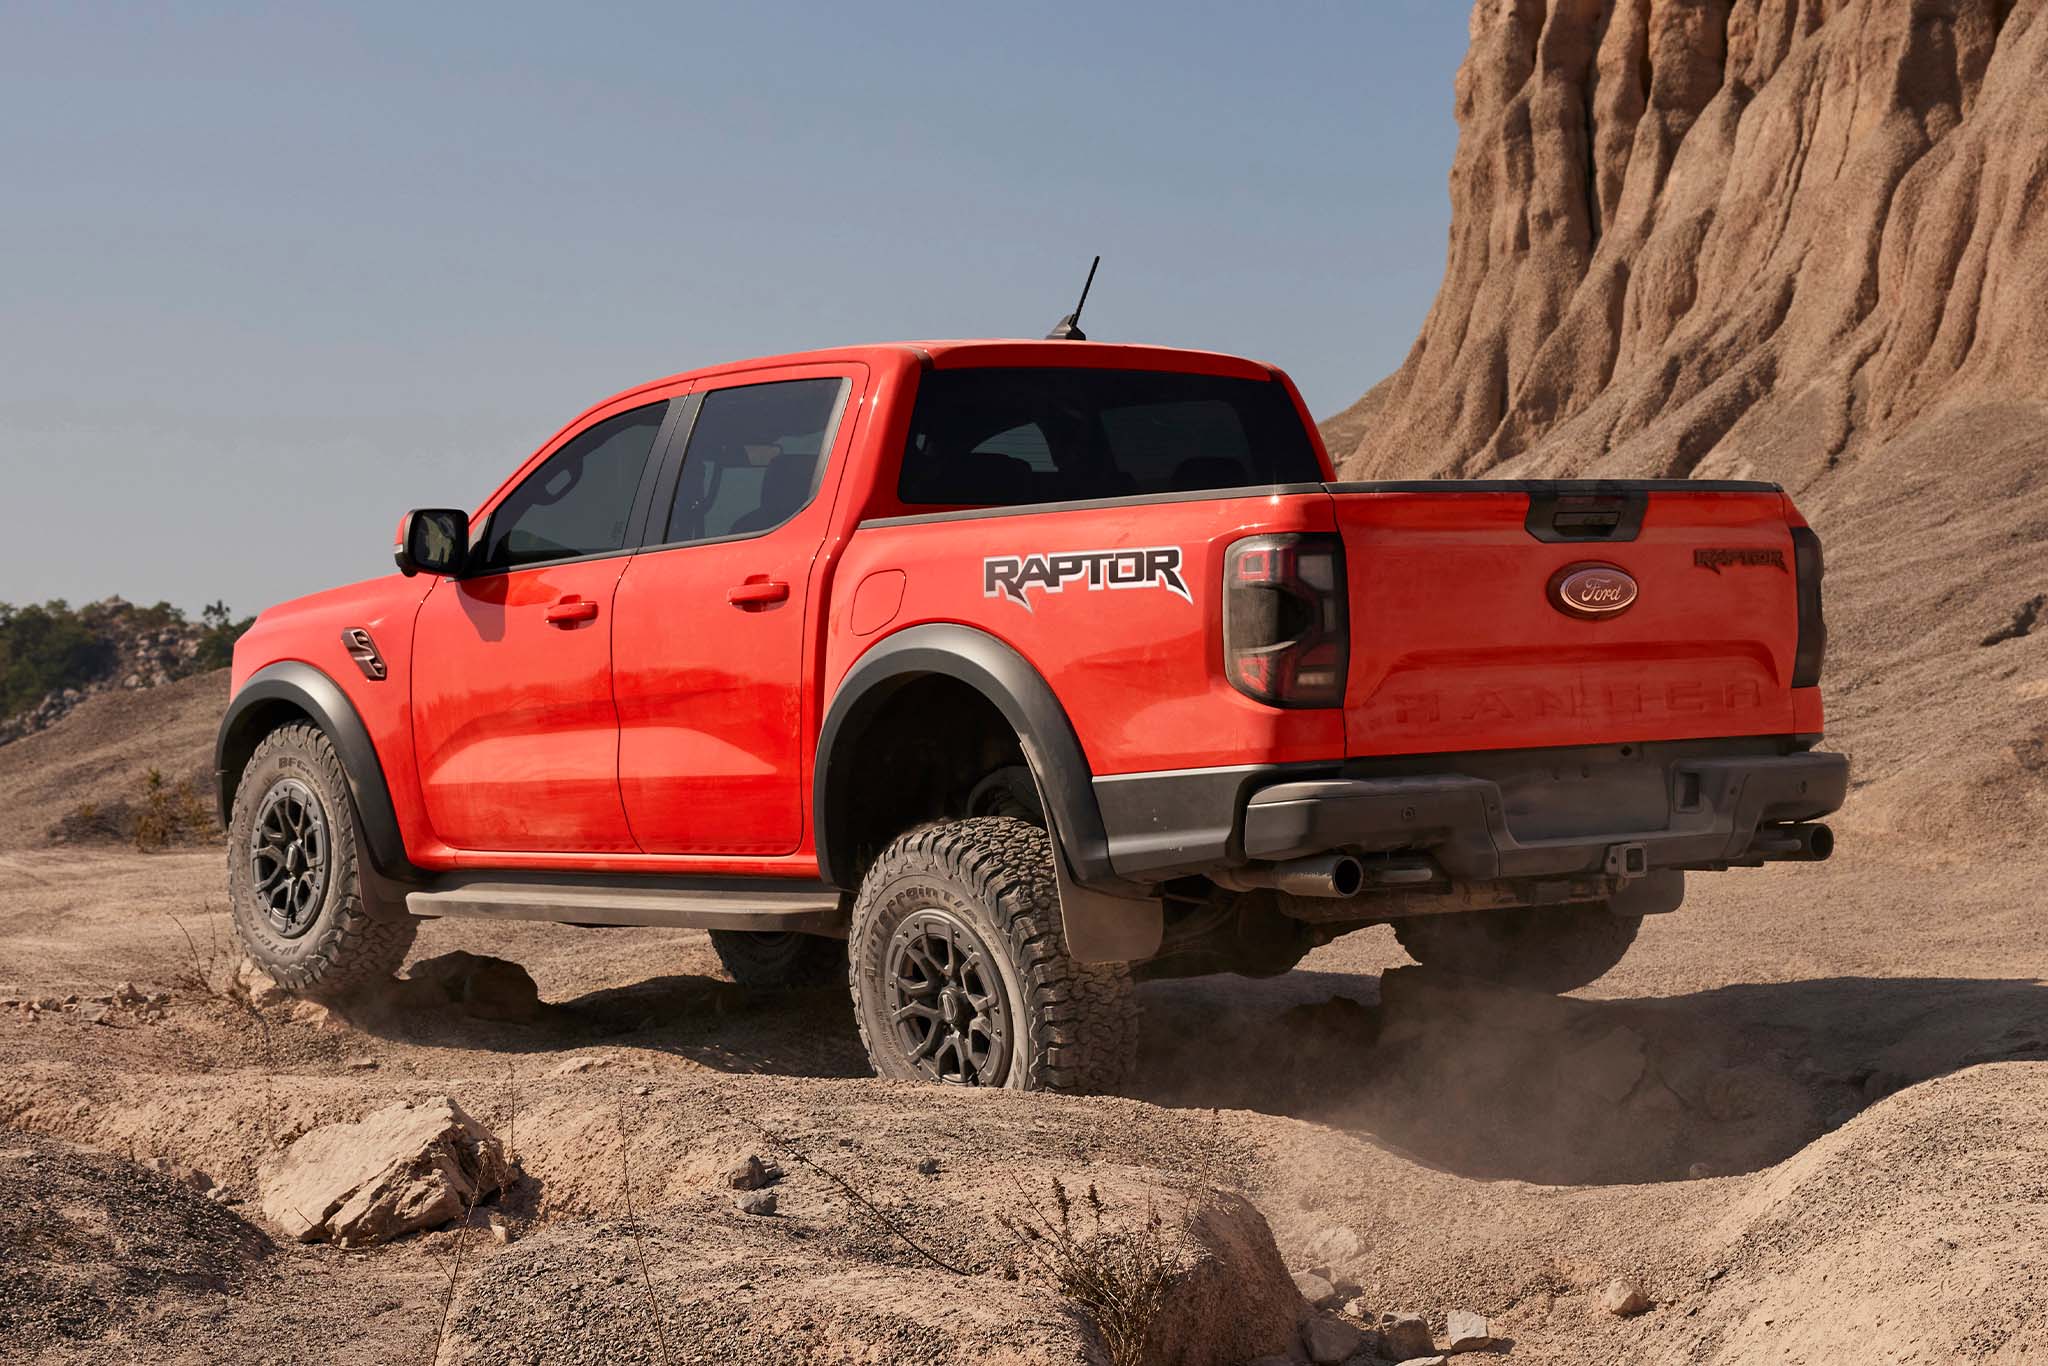 Ford Ranger Raptor Finally Coming to America: Here's What We Know